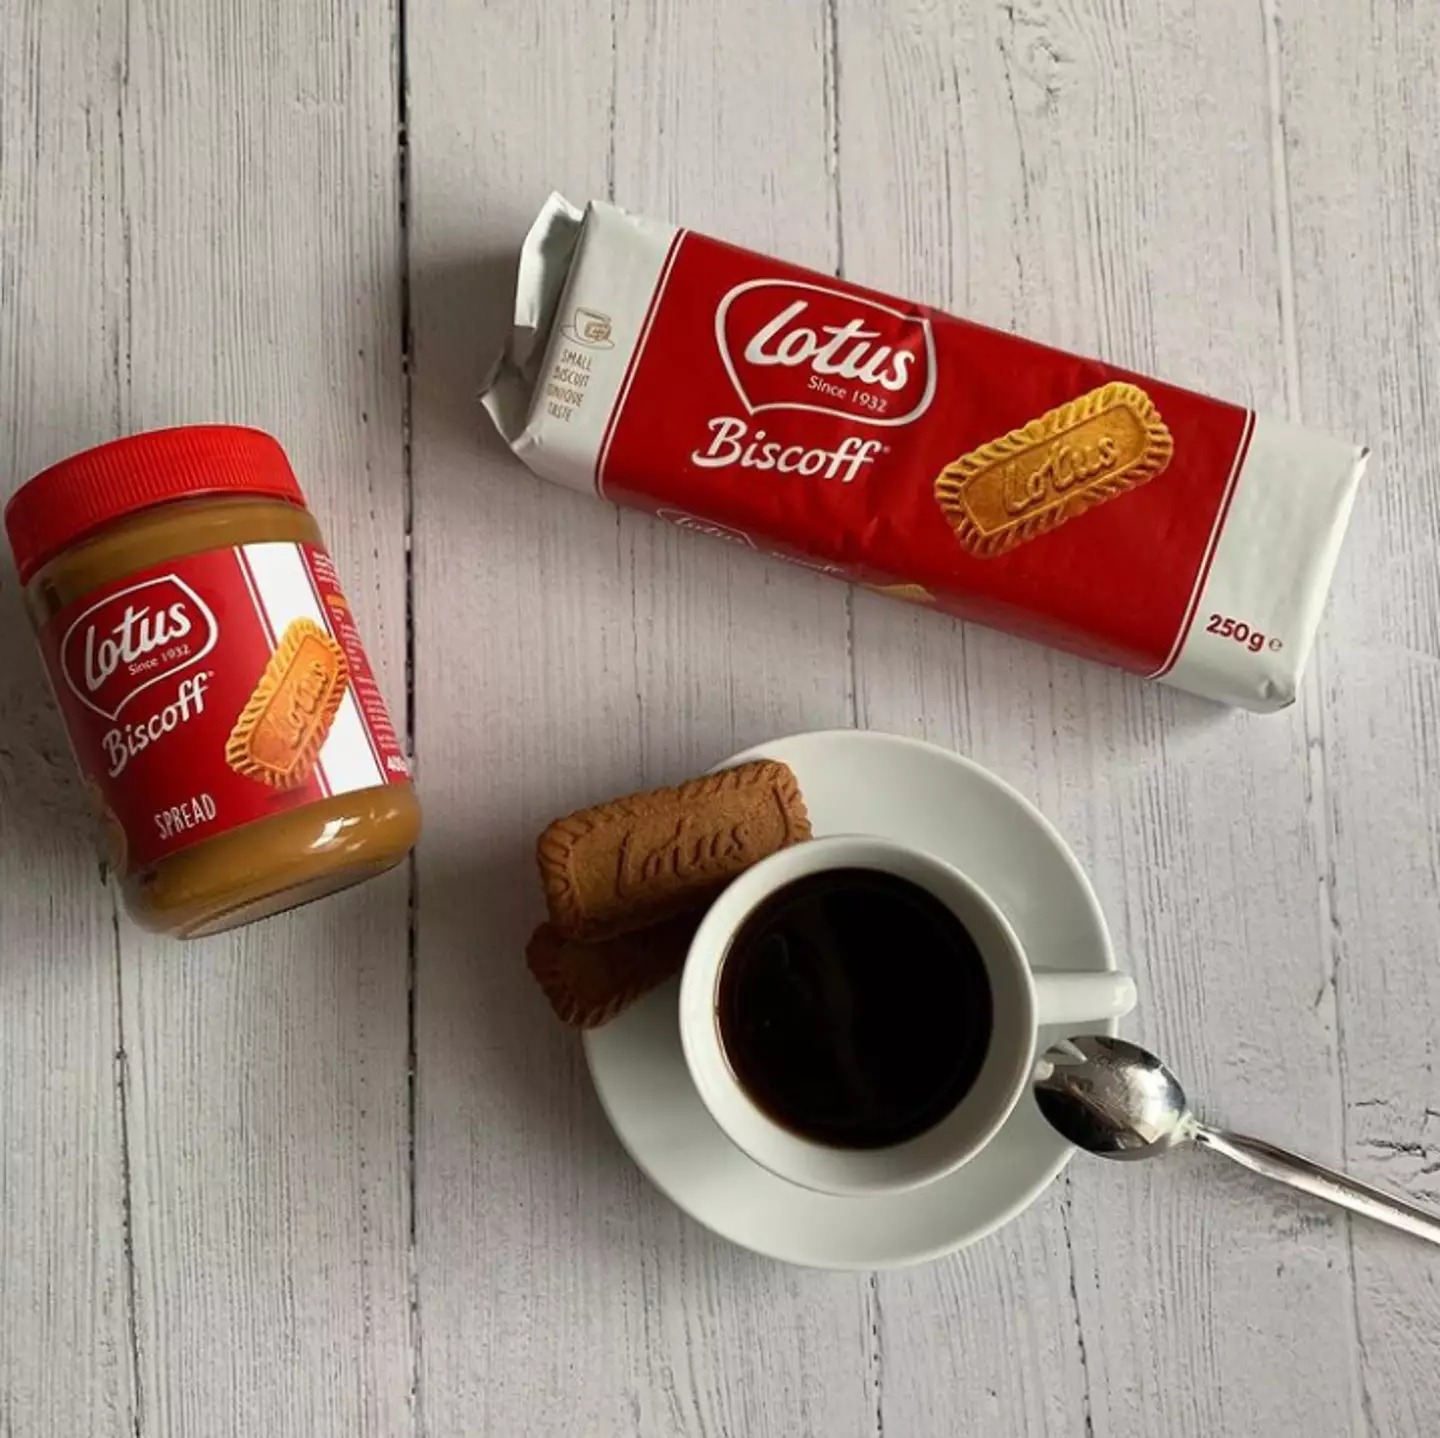 You can make the ganache Biscoff-based if you want to switch it up from Caramilk (